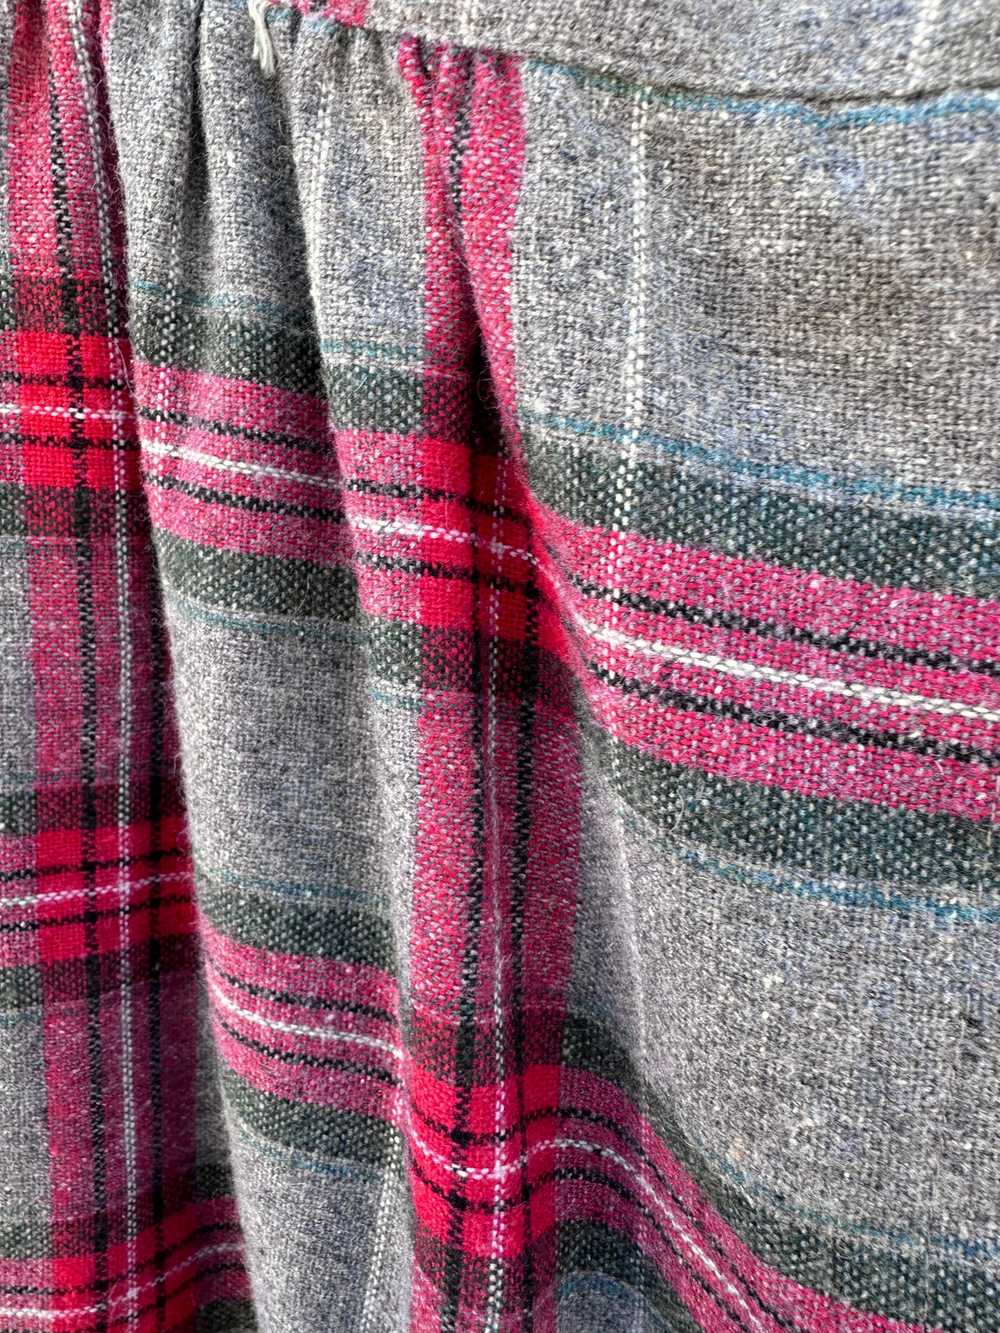 Red and Gray Plaid Wool Skirt 1960's - image 2